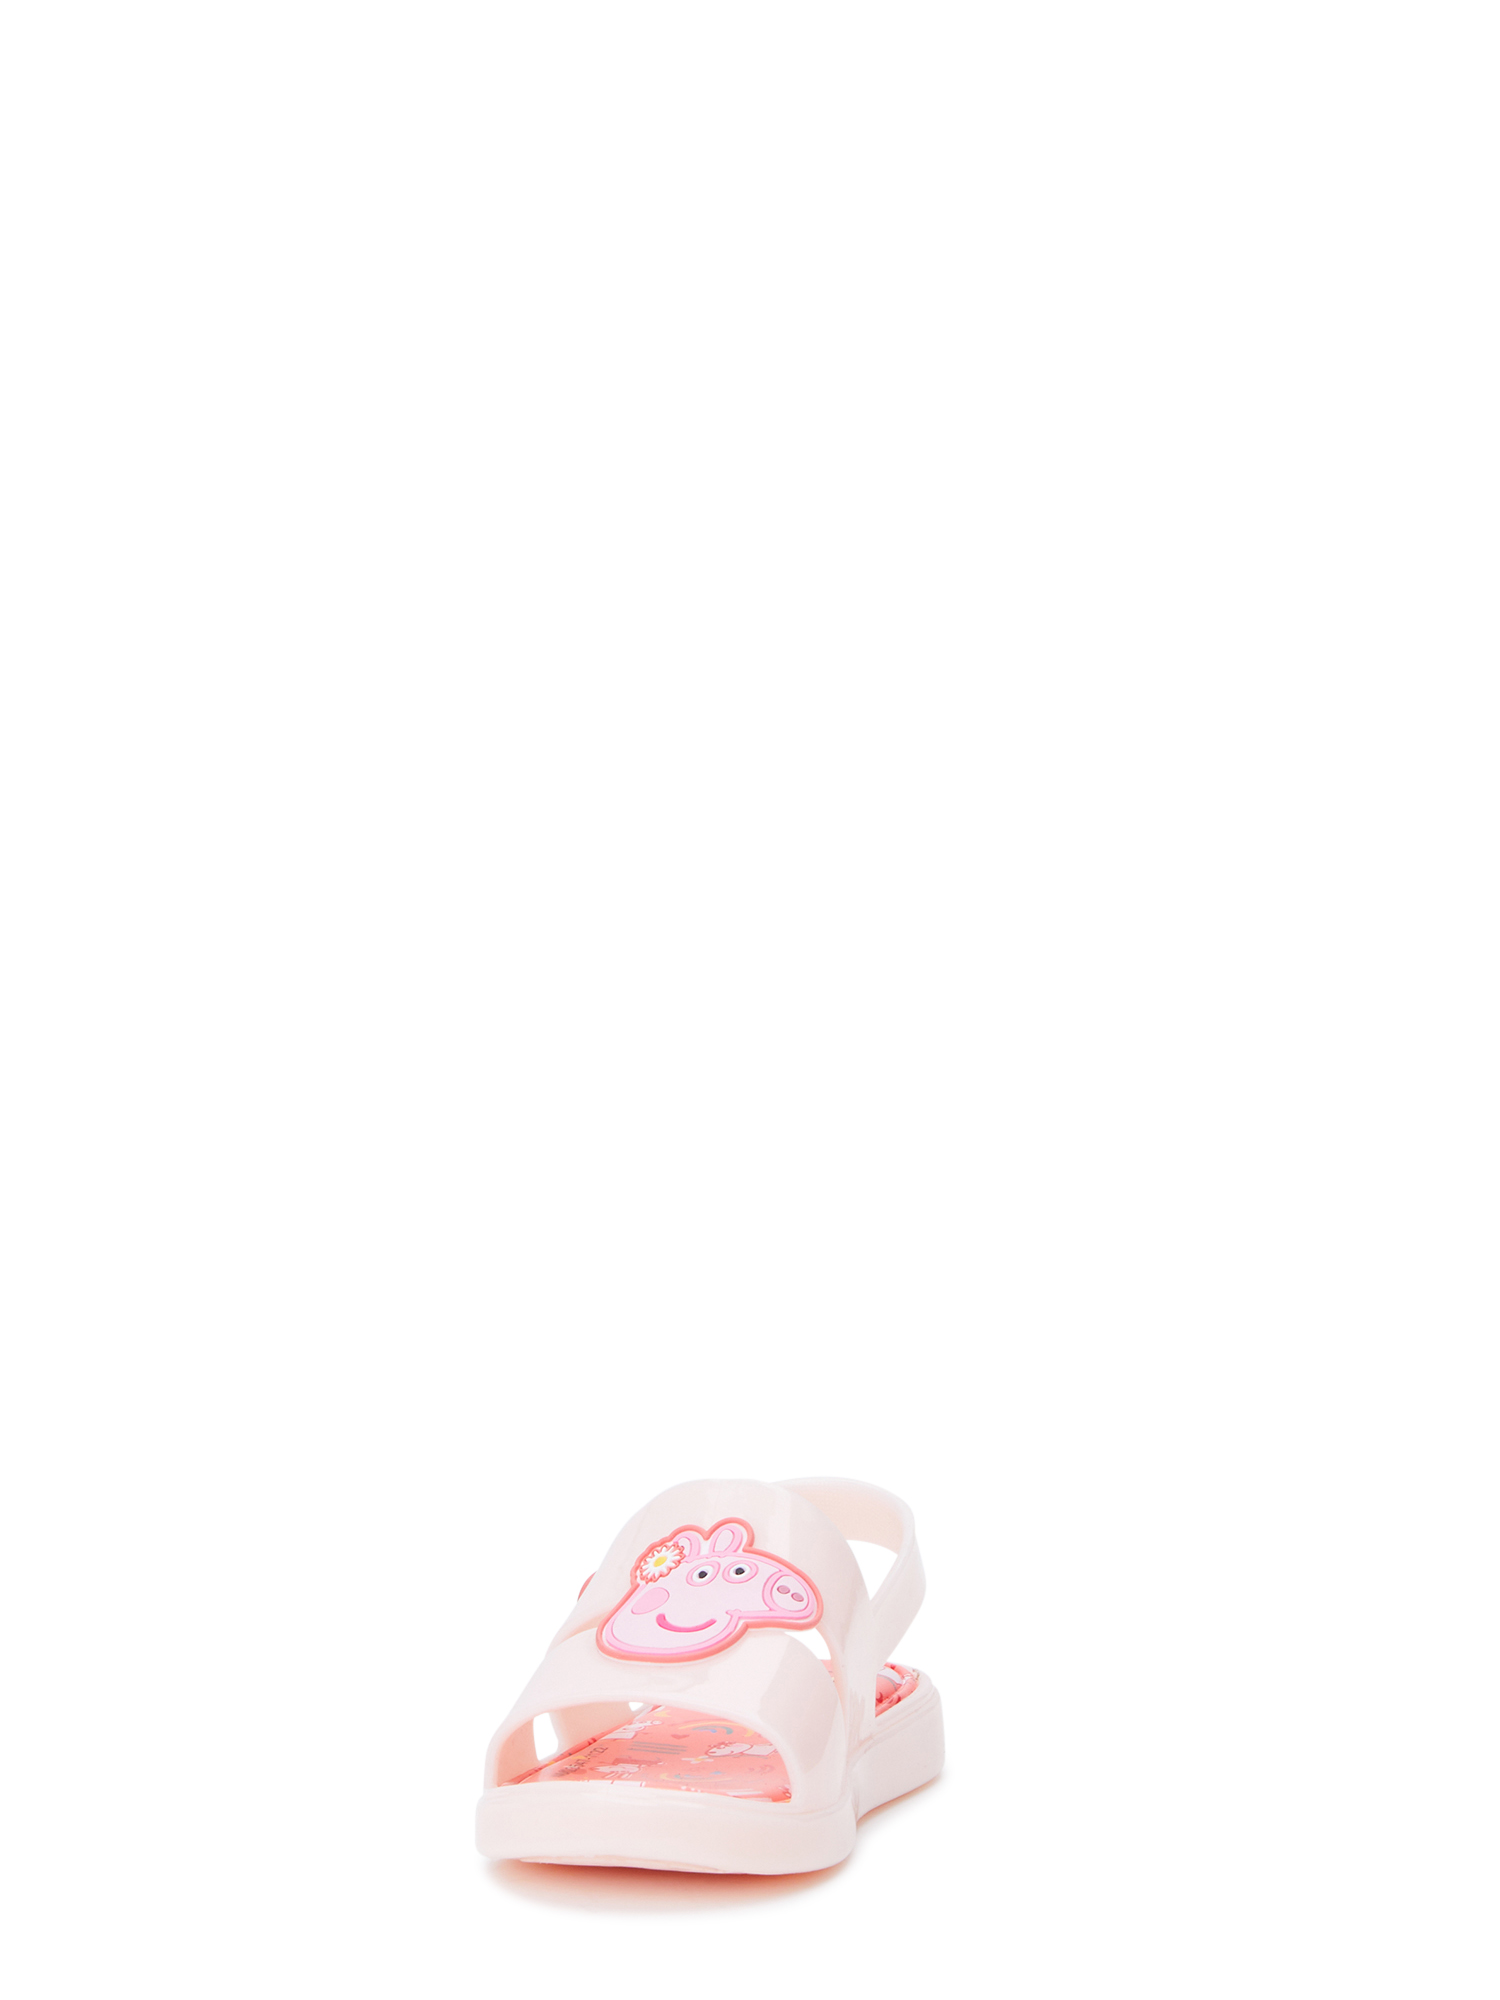 Peppa Pig Jelly Sandals